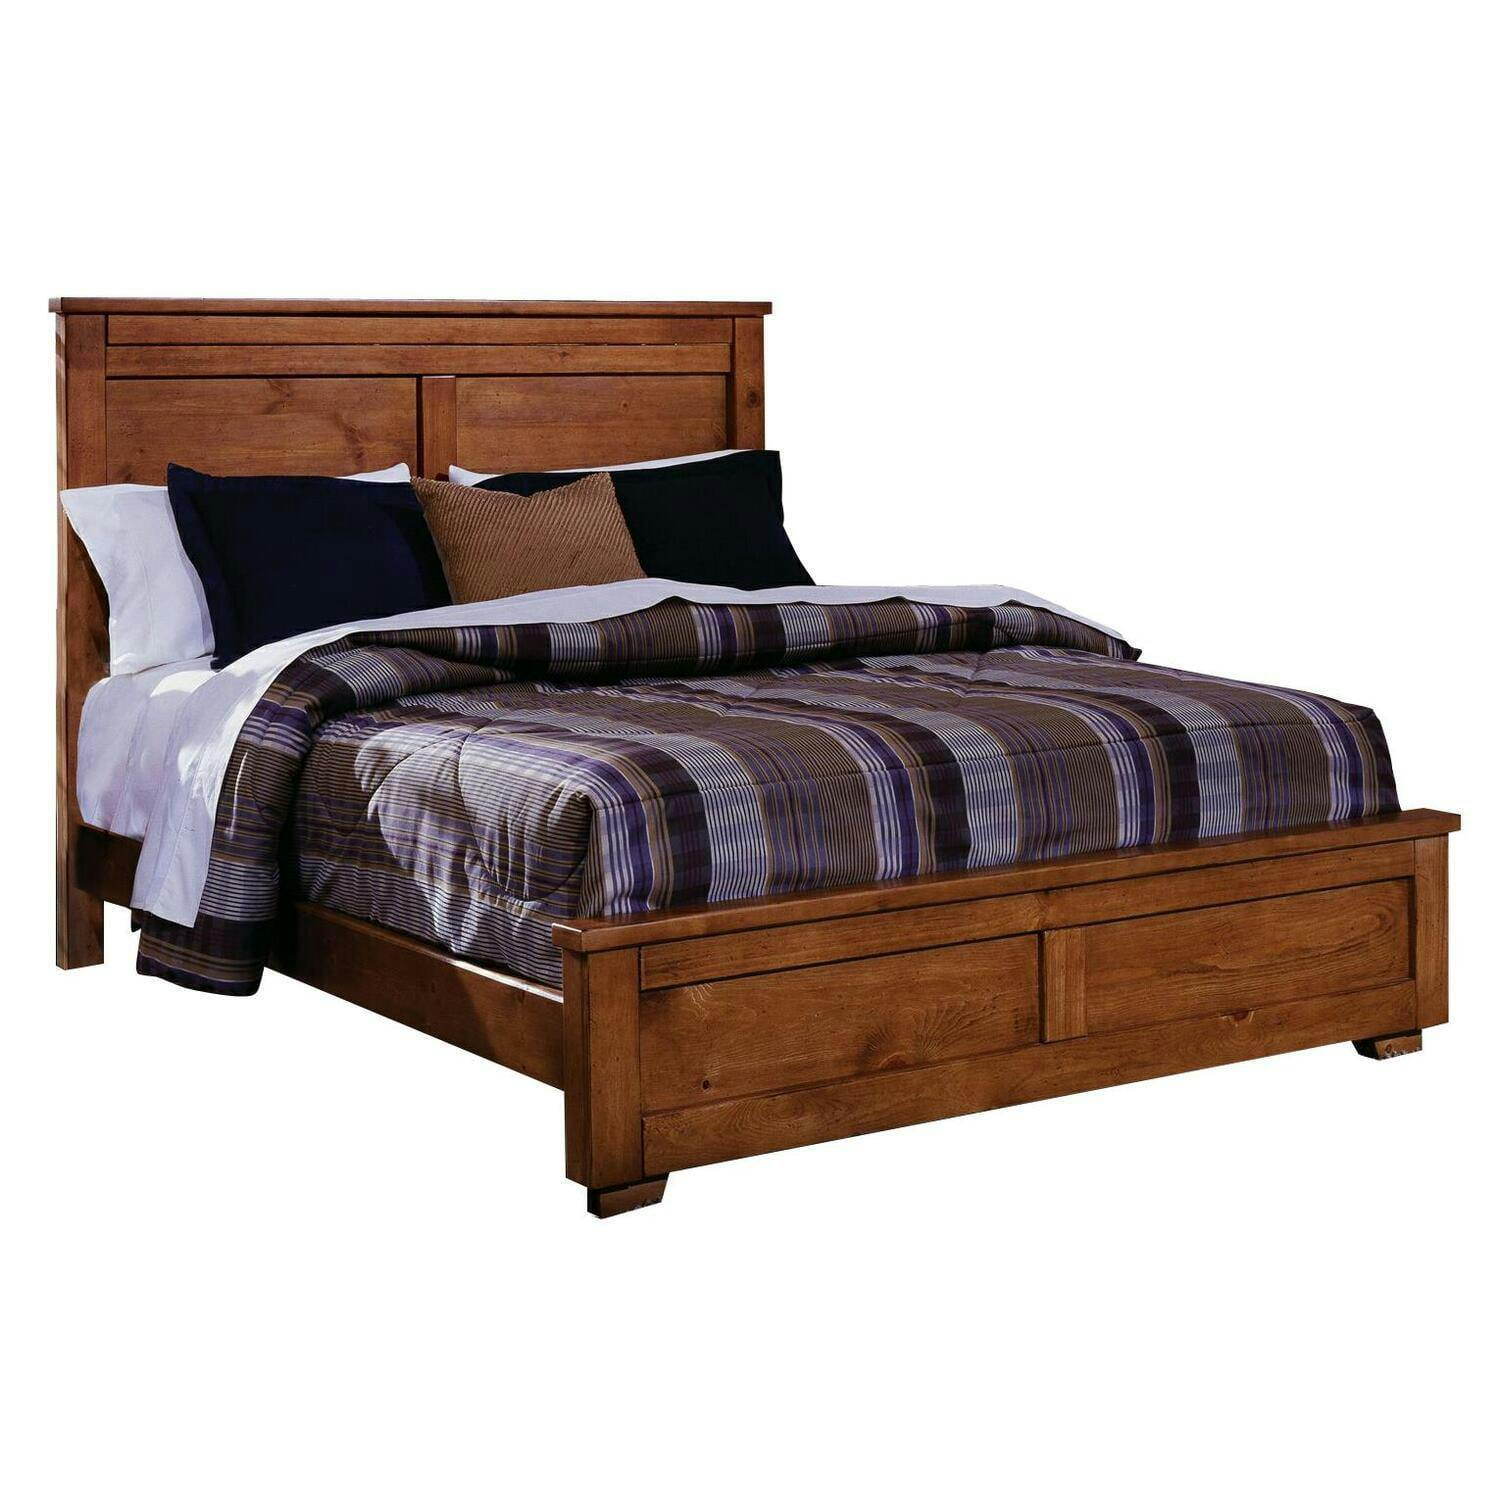 Transitional Cinnamon Brown Pine Queen Panel Bed with Upholstered Headboard